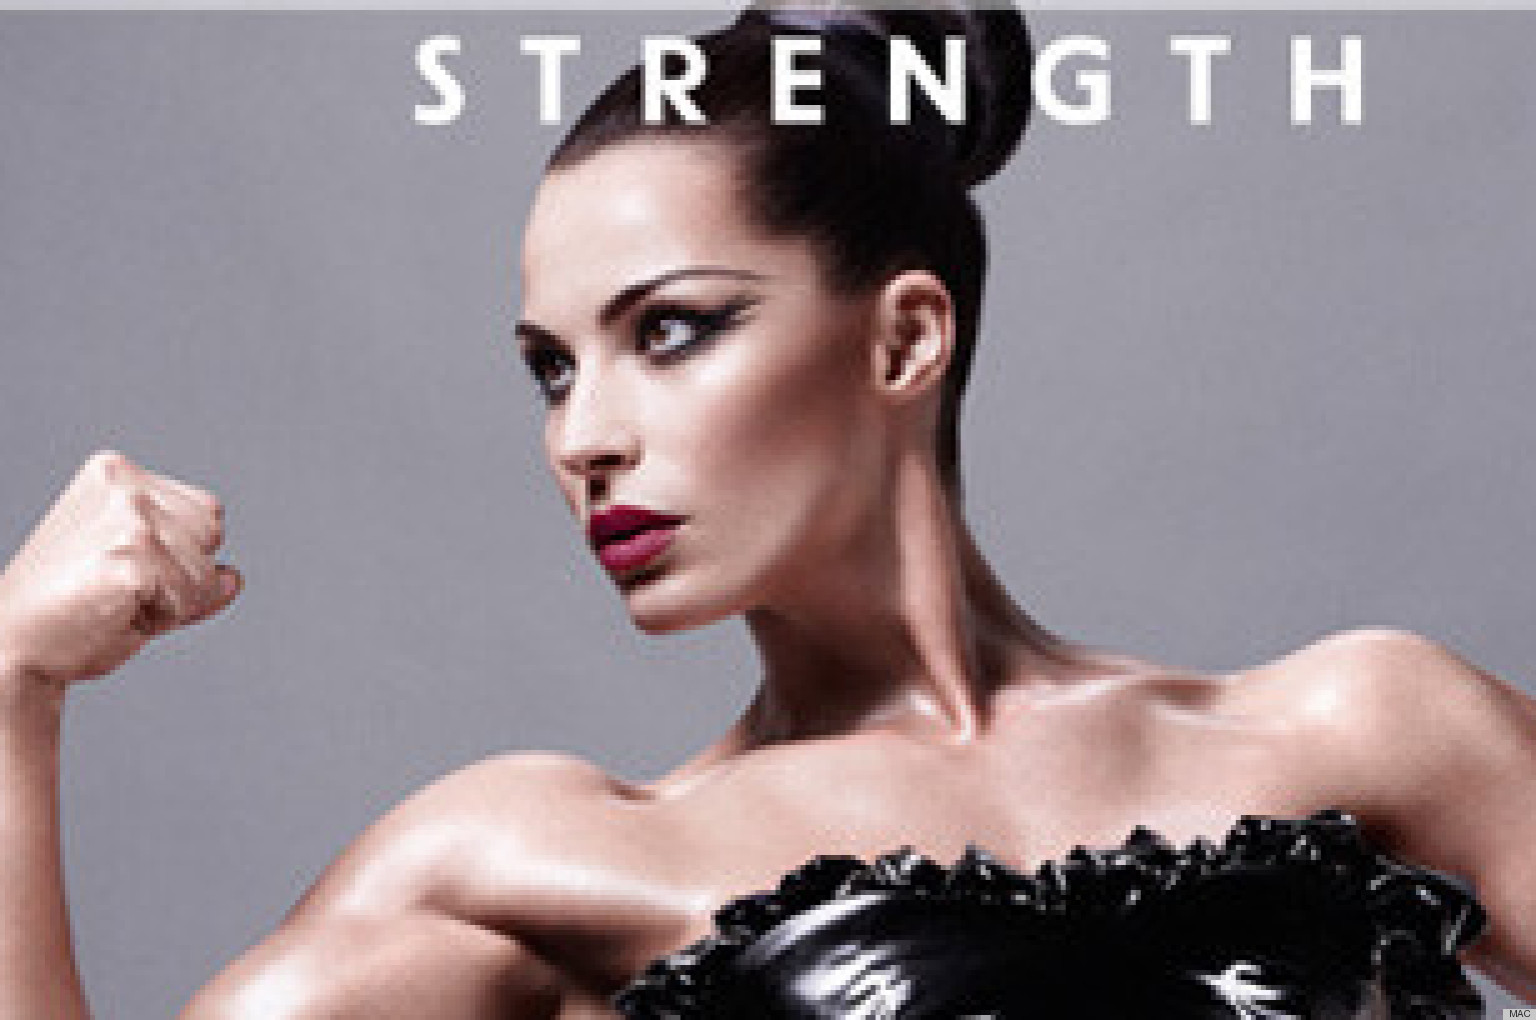 Jelena Abbou, Serbian Bodybuilder, Is The New Face Of MAC (PHOTO)1536 x 1020